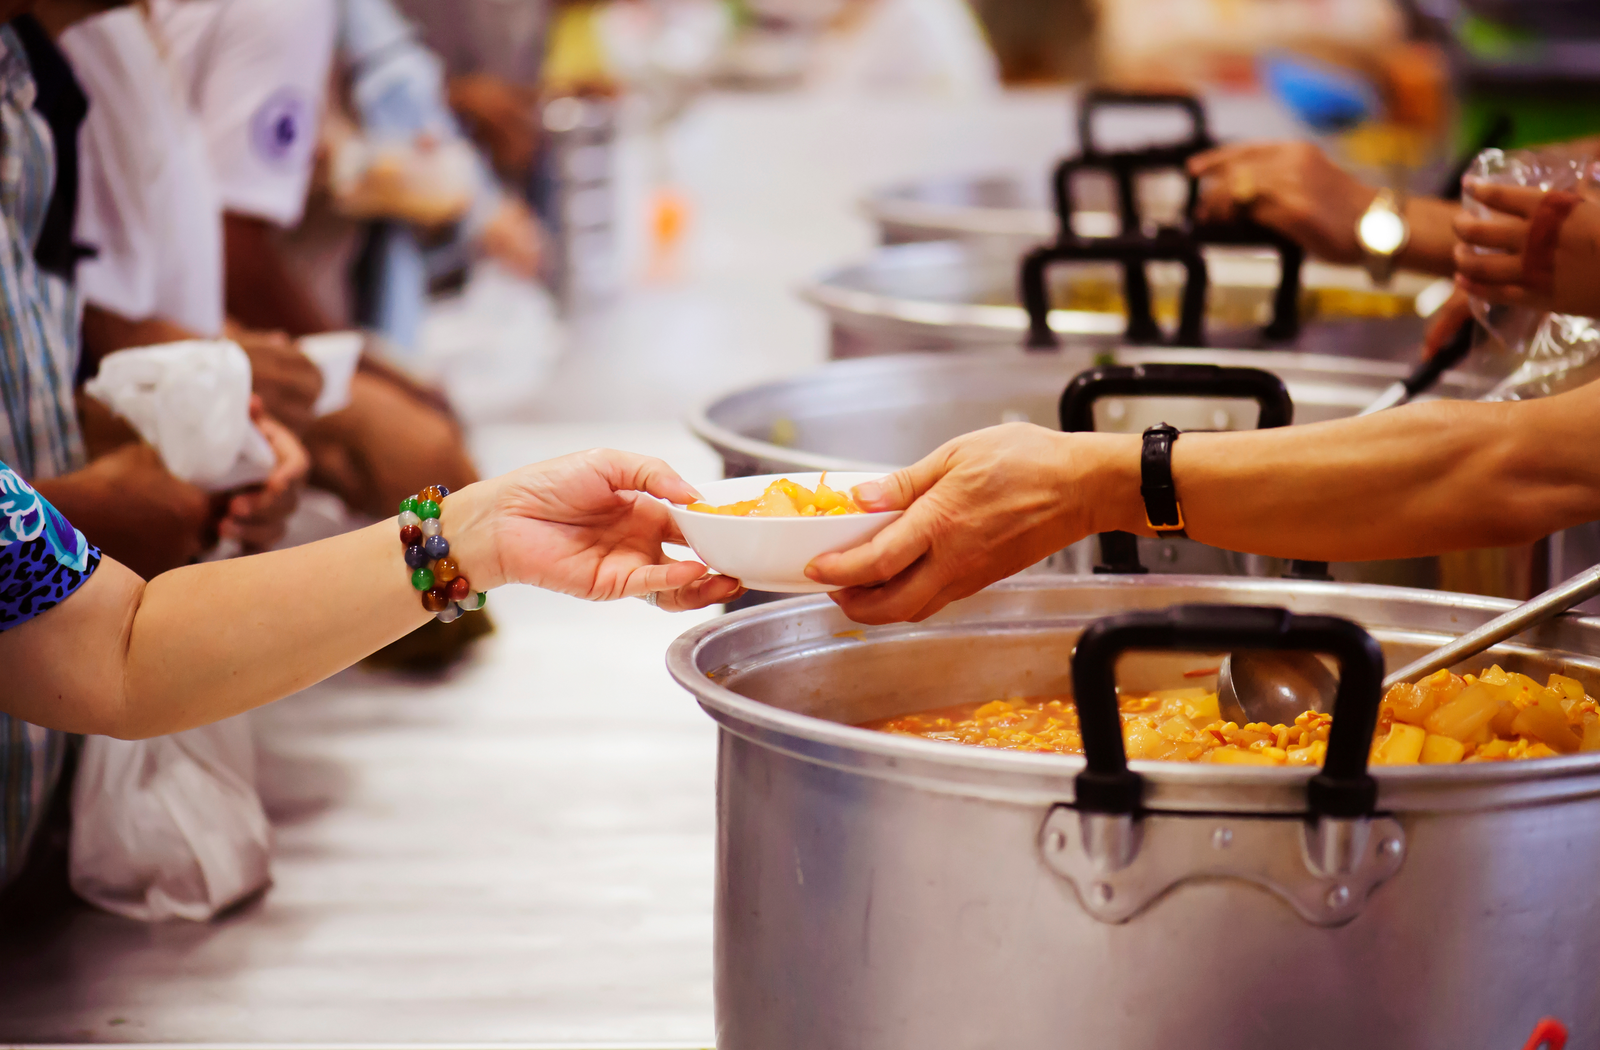 What To Know Before You Volunteer At A Homeless Shelter